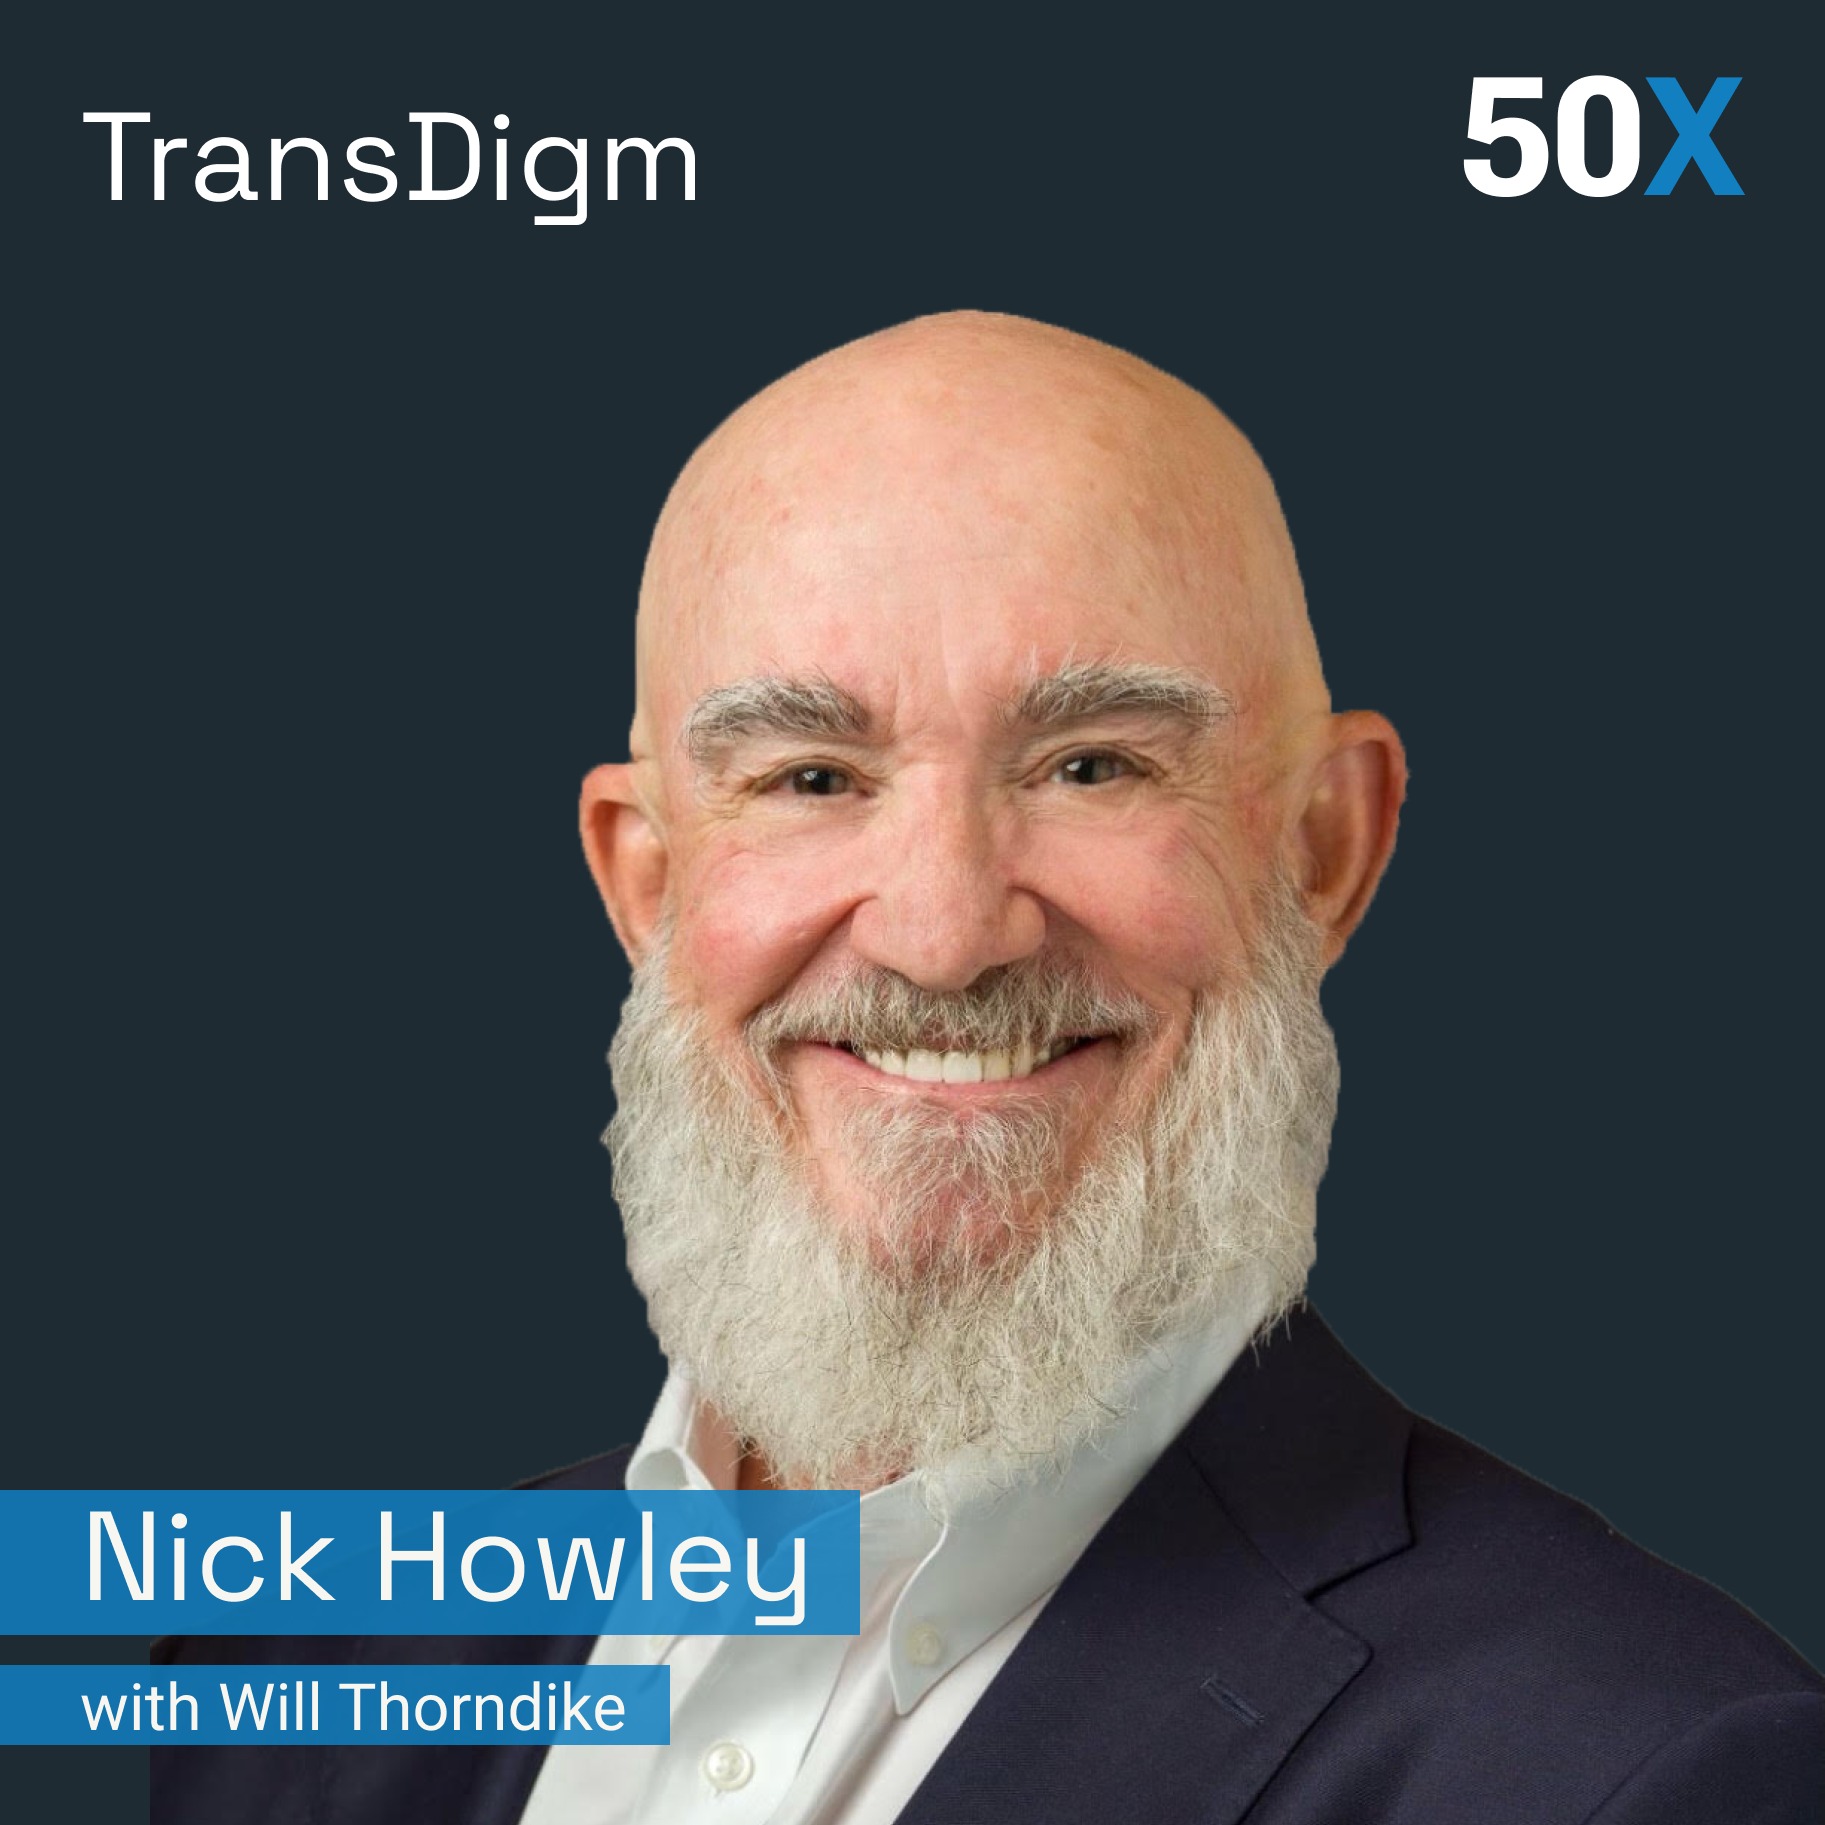 TransDigm: Foundations with Nick Howley